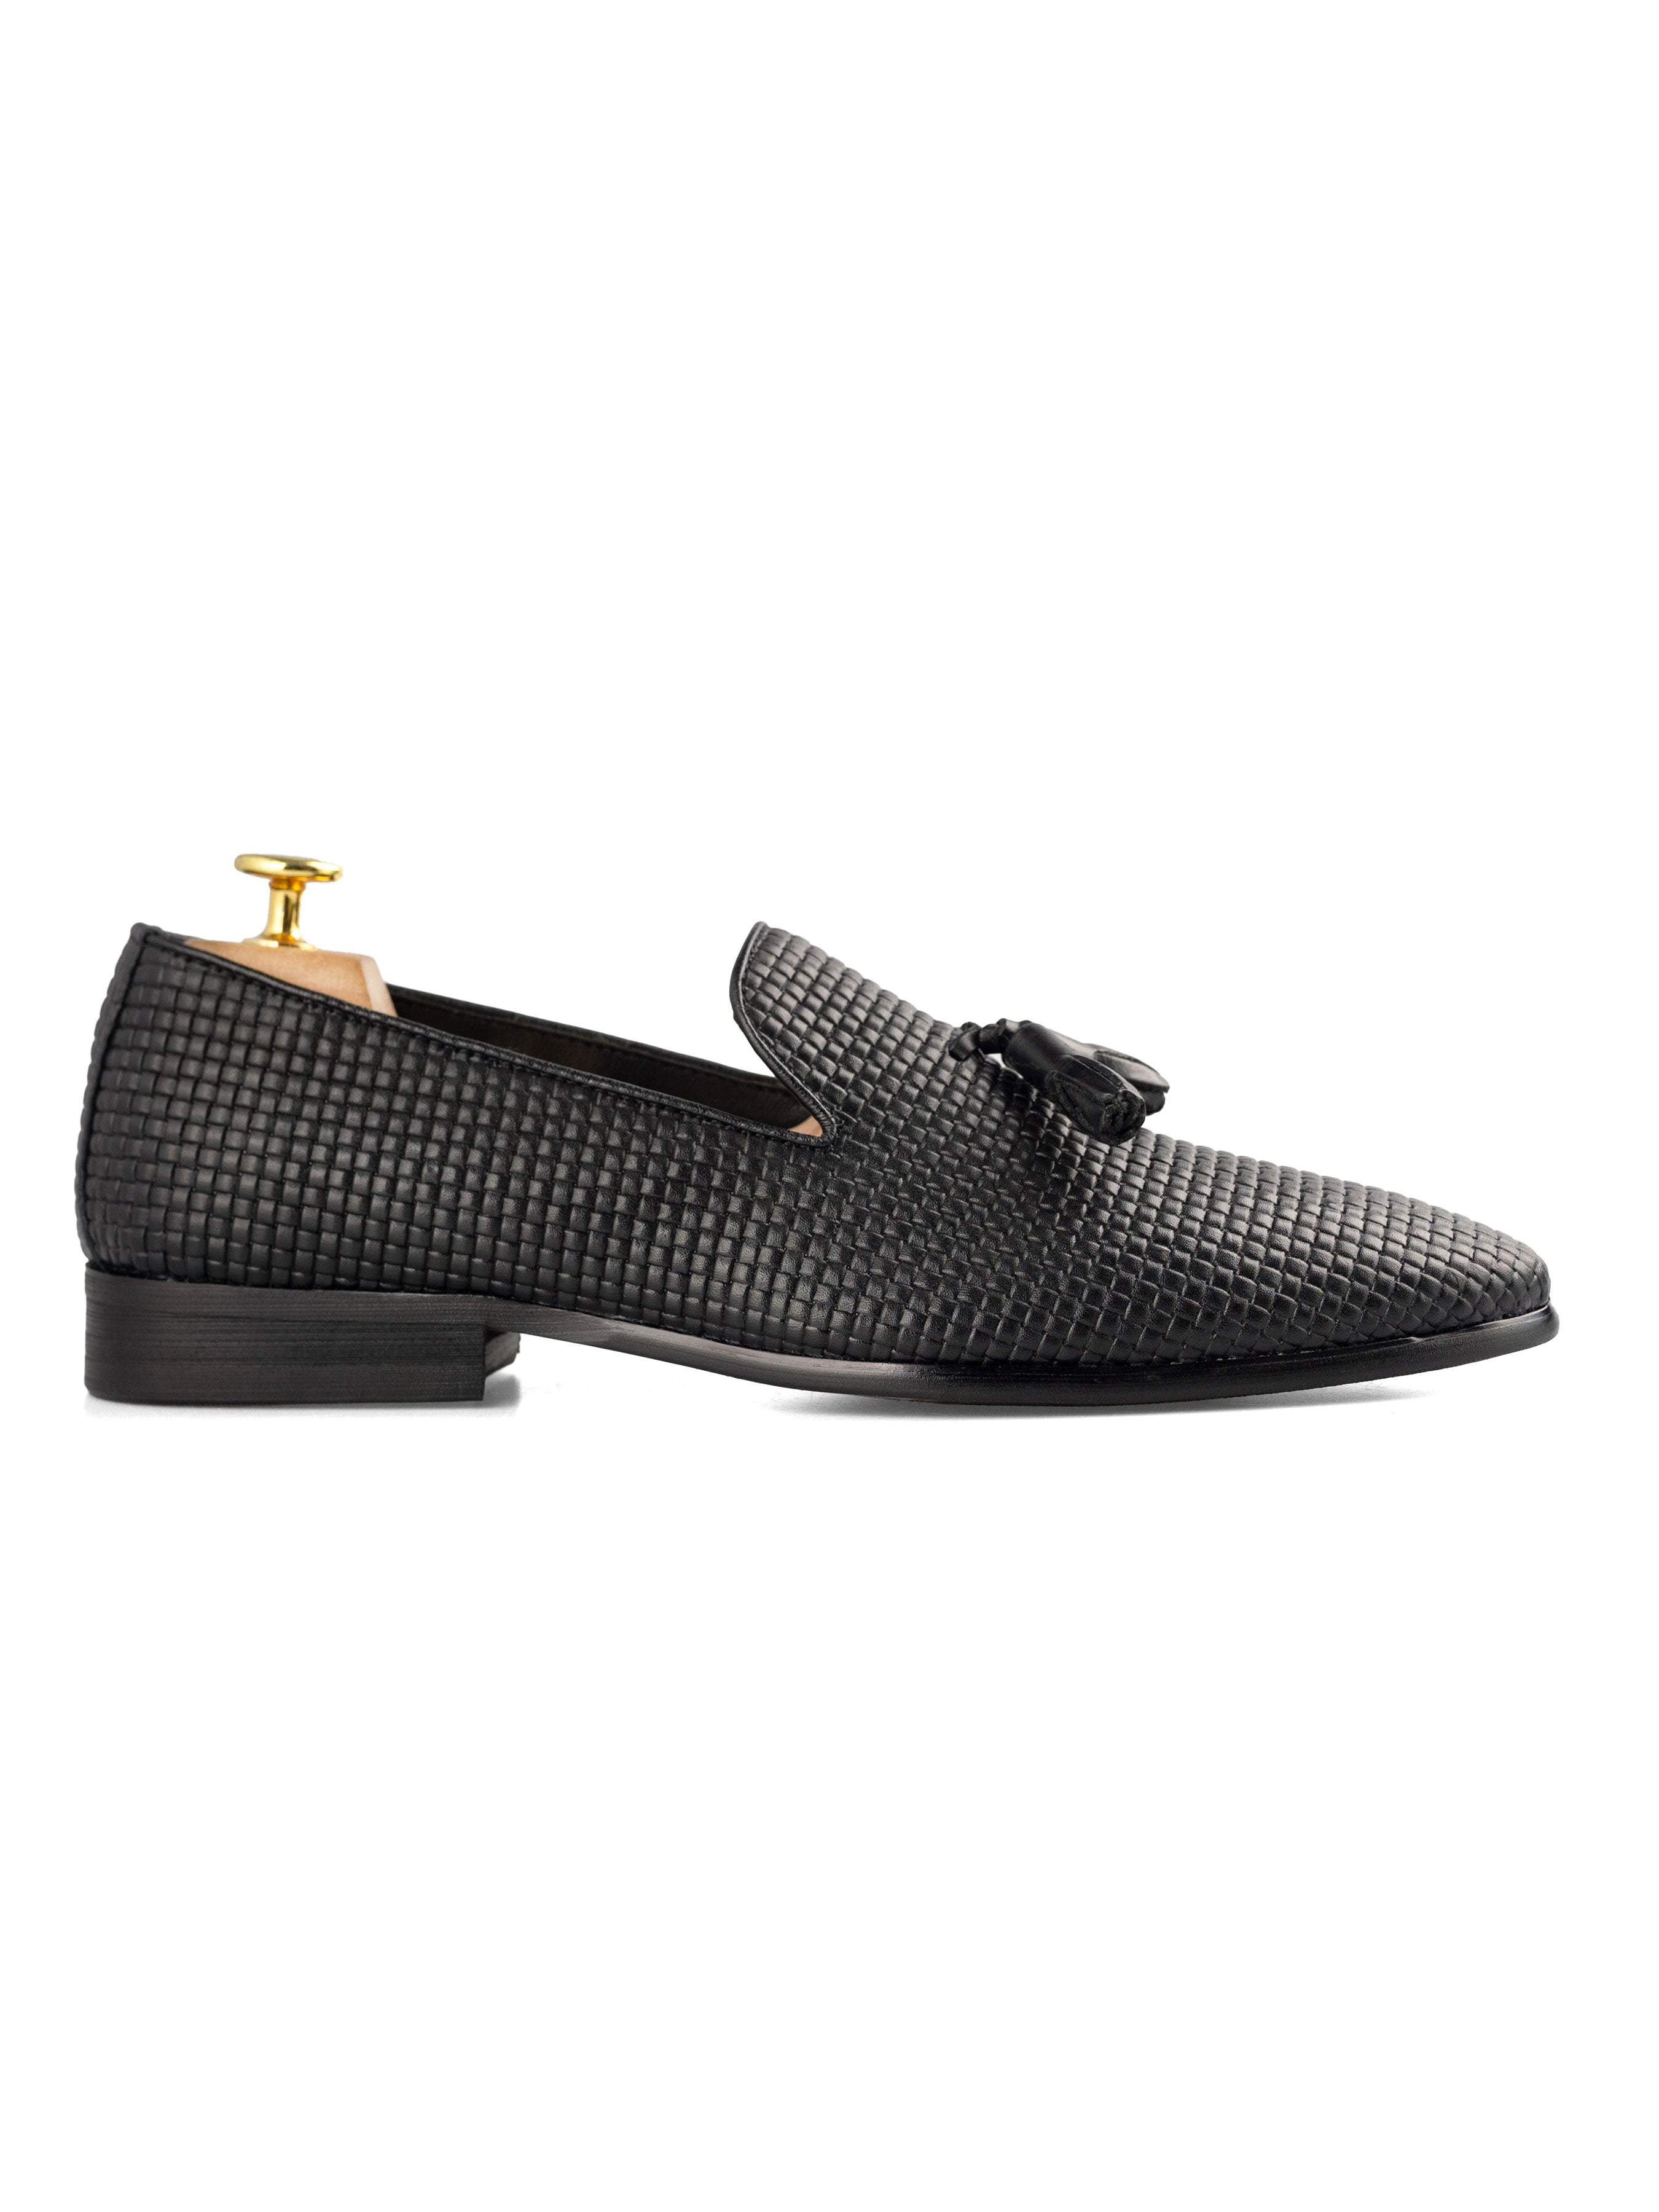 Loafer Slipper - Black Woven Leather - Zeve Shoes